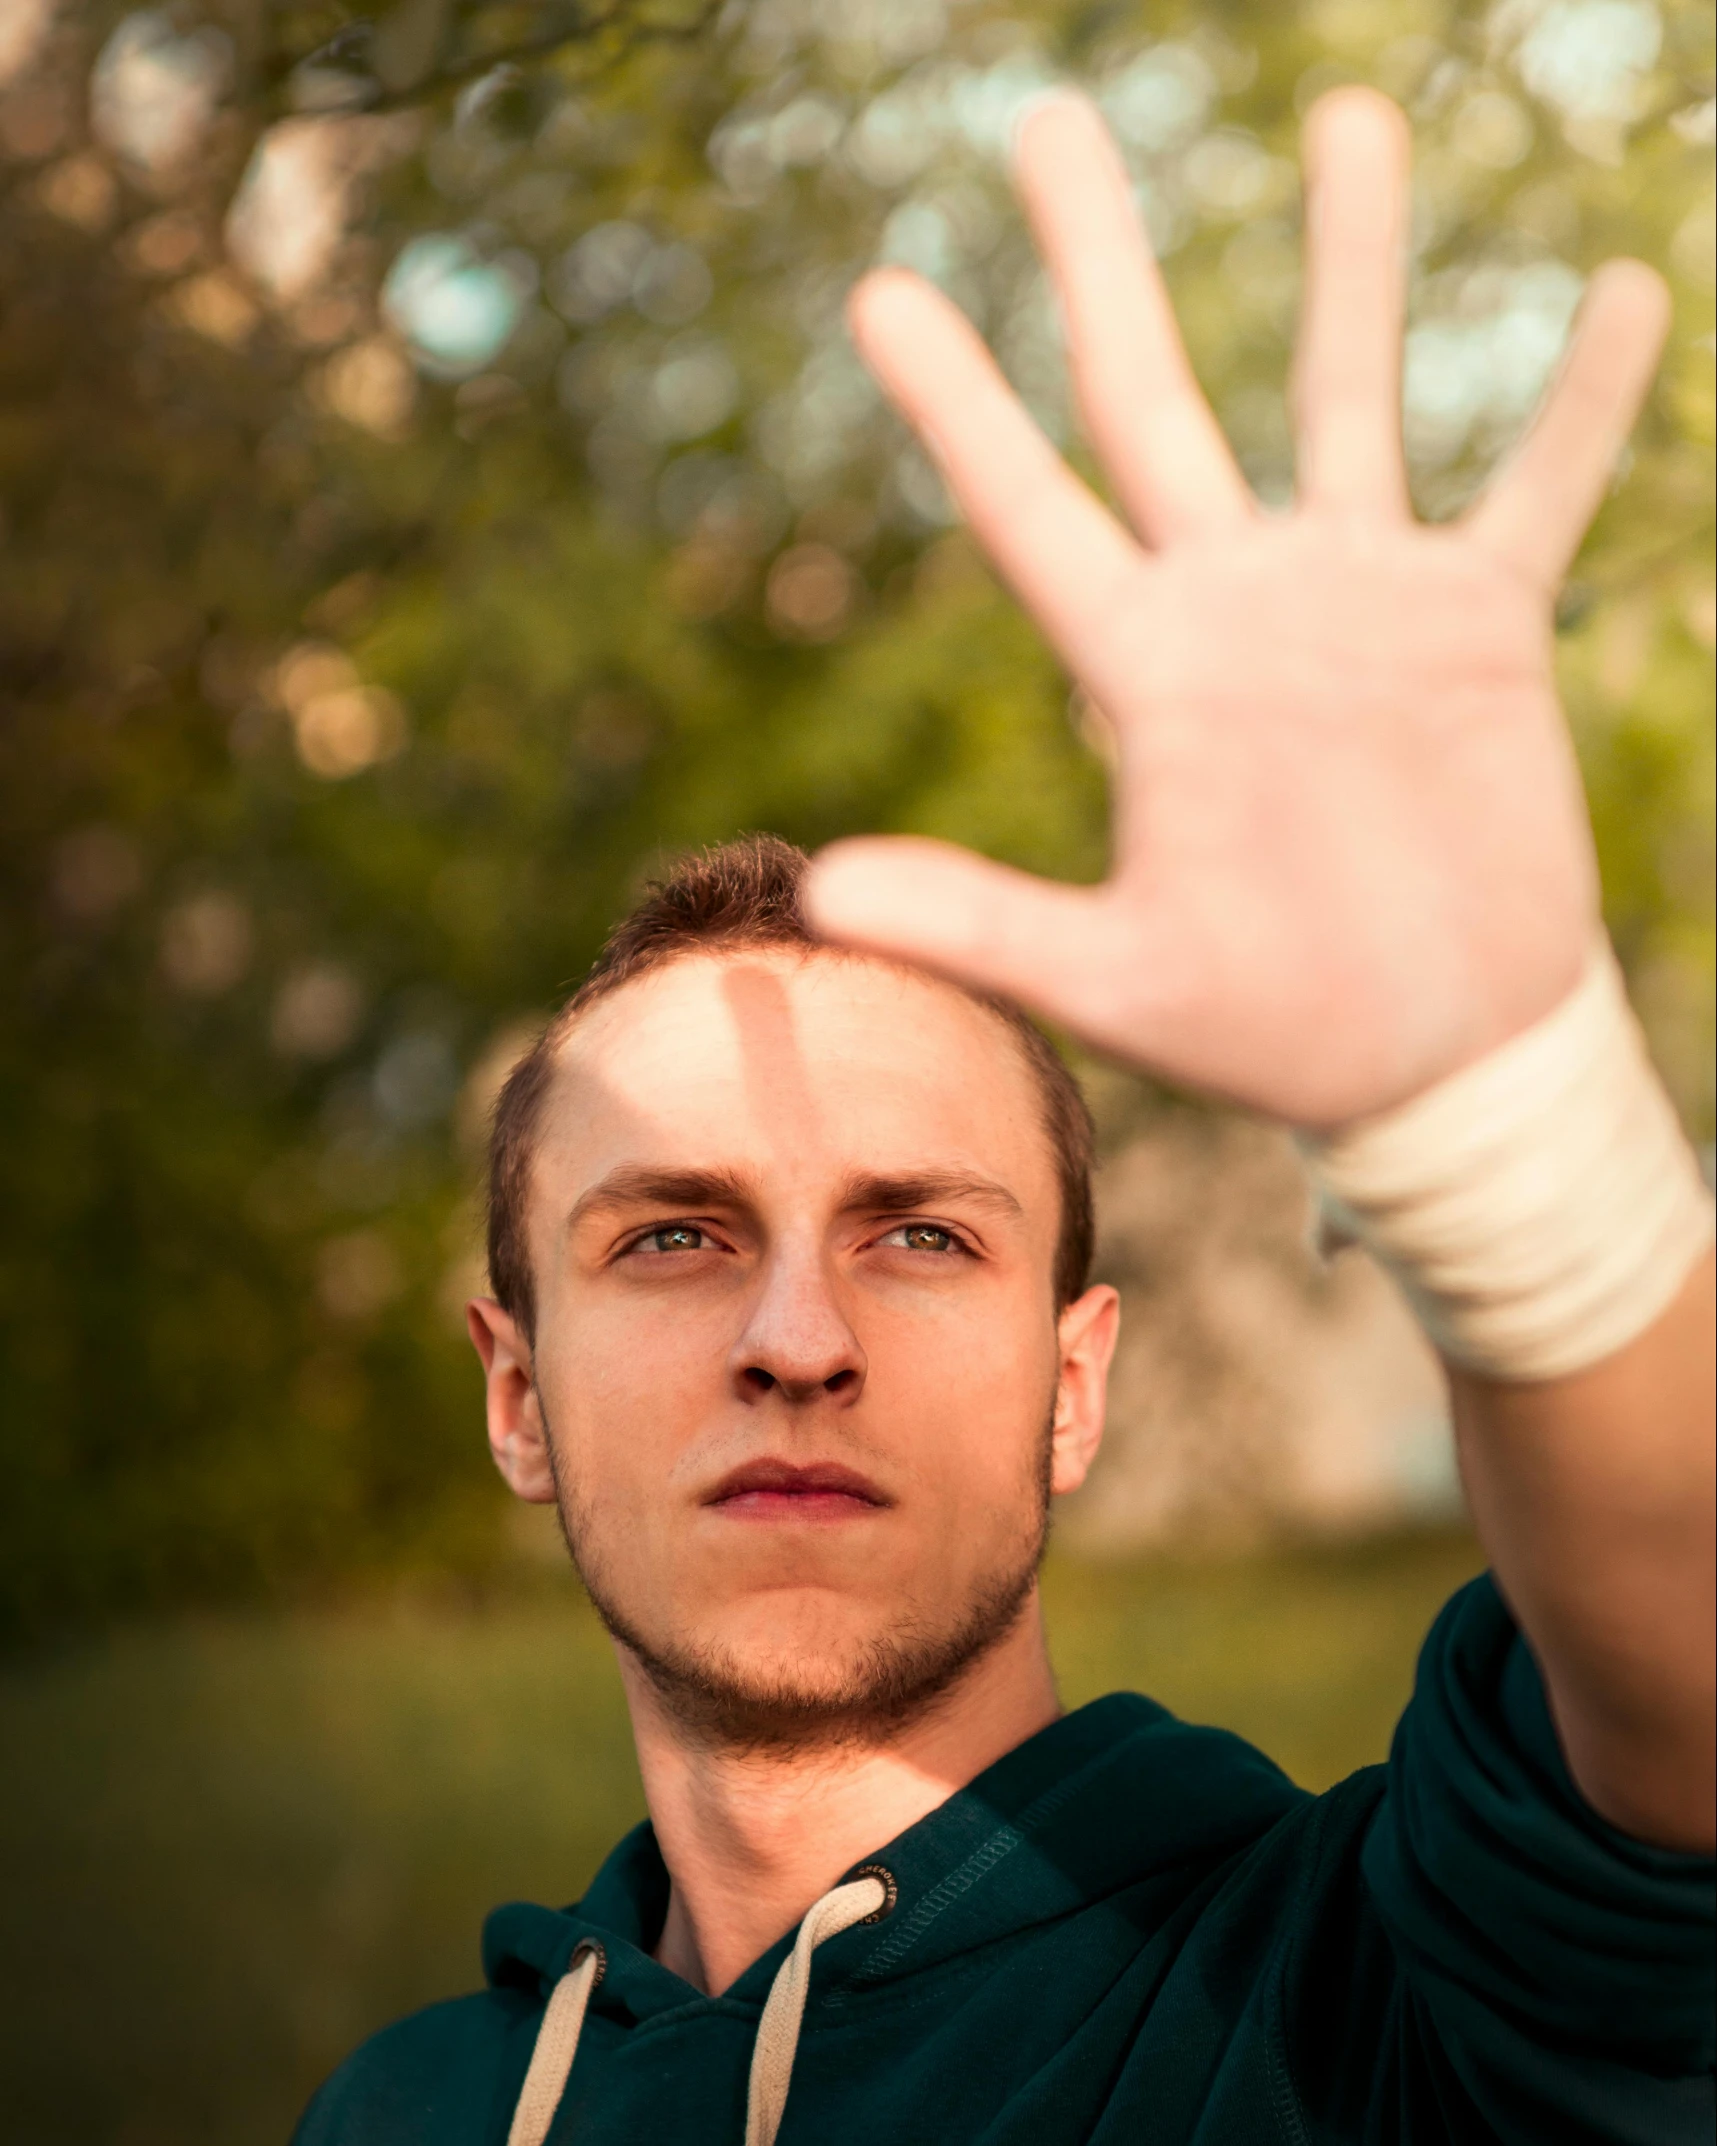 a young man in green holds up his hand and poses